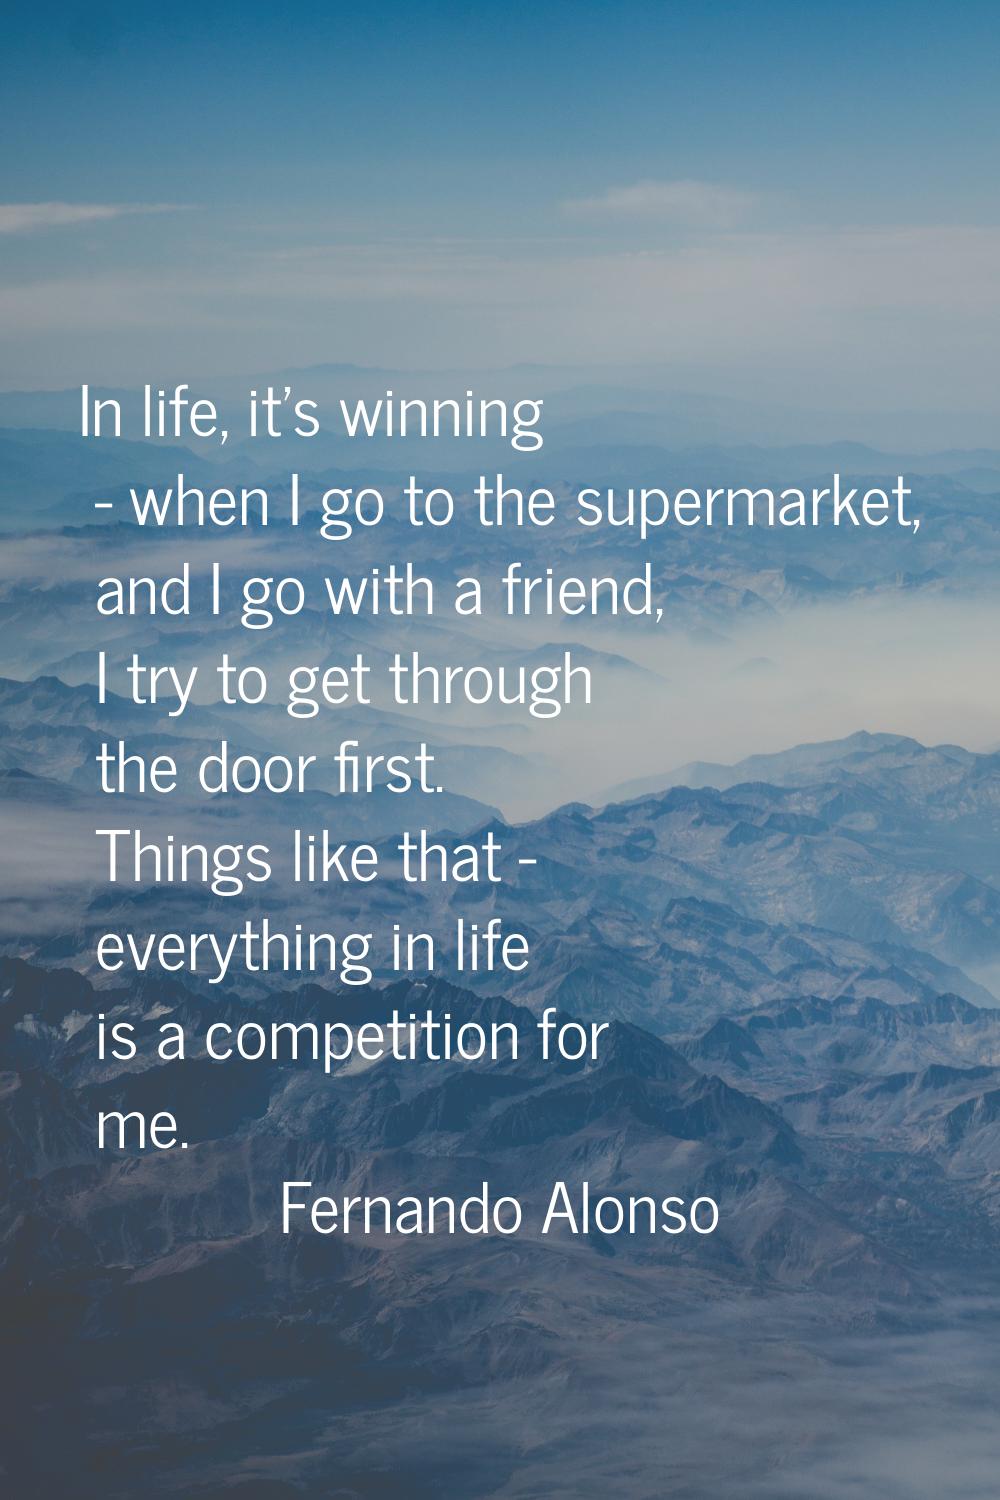 In life, it's winning - when I go to the supermarket, and I go with a friend, I try to get through 